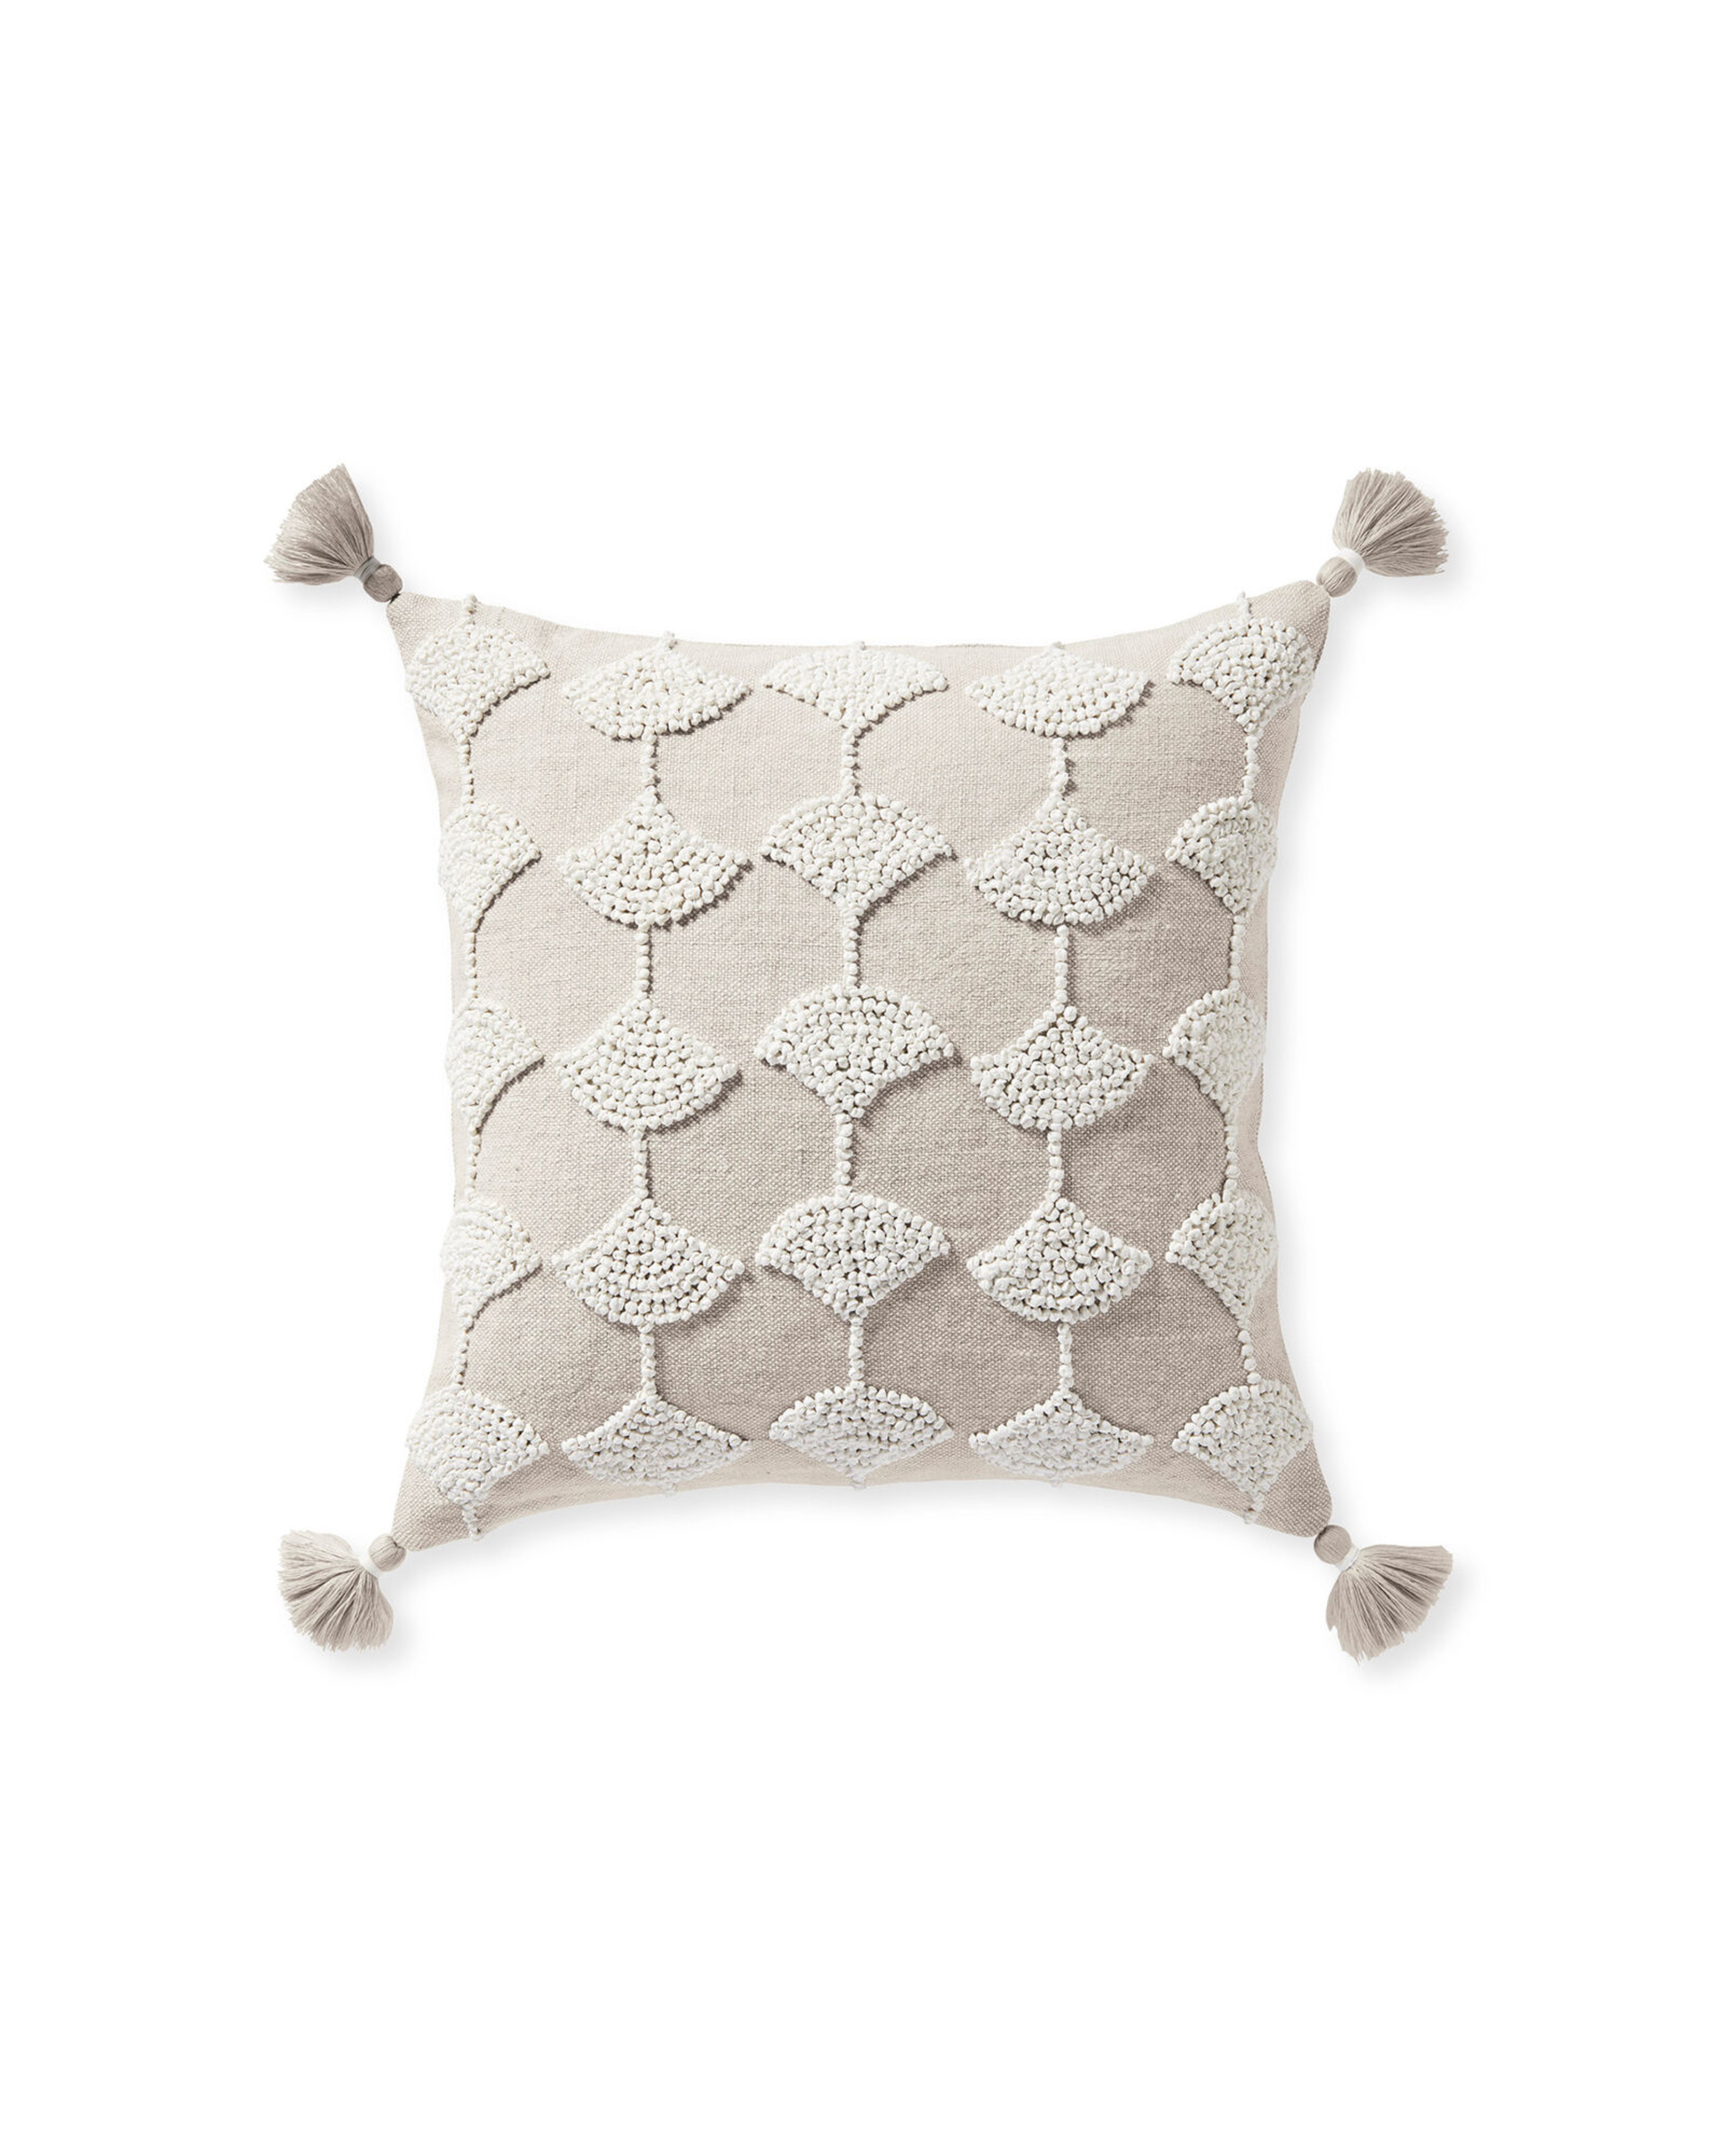 Isora Pillow Cover - Serena and Lily